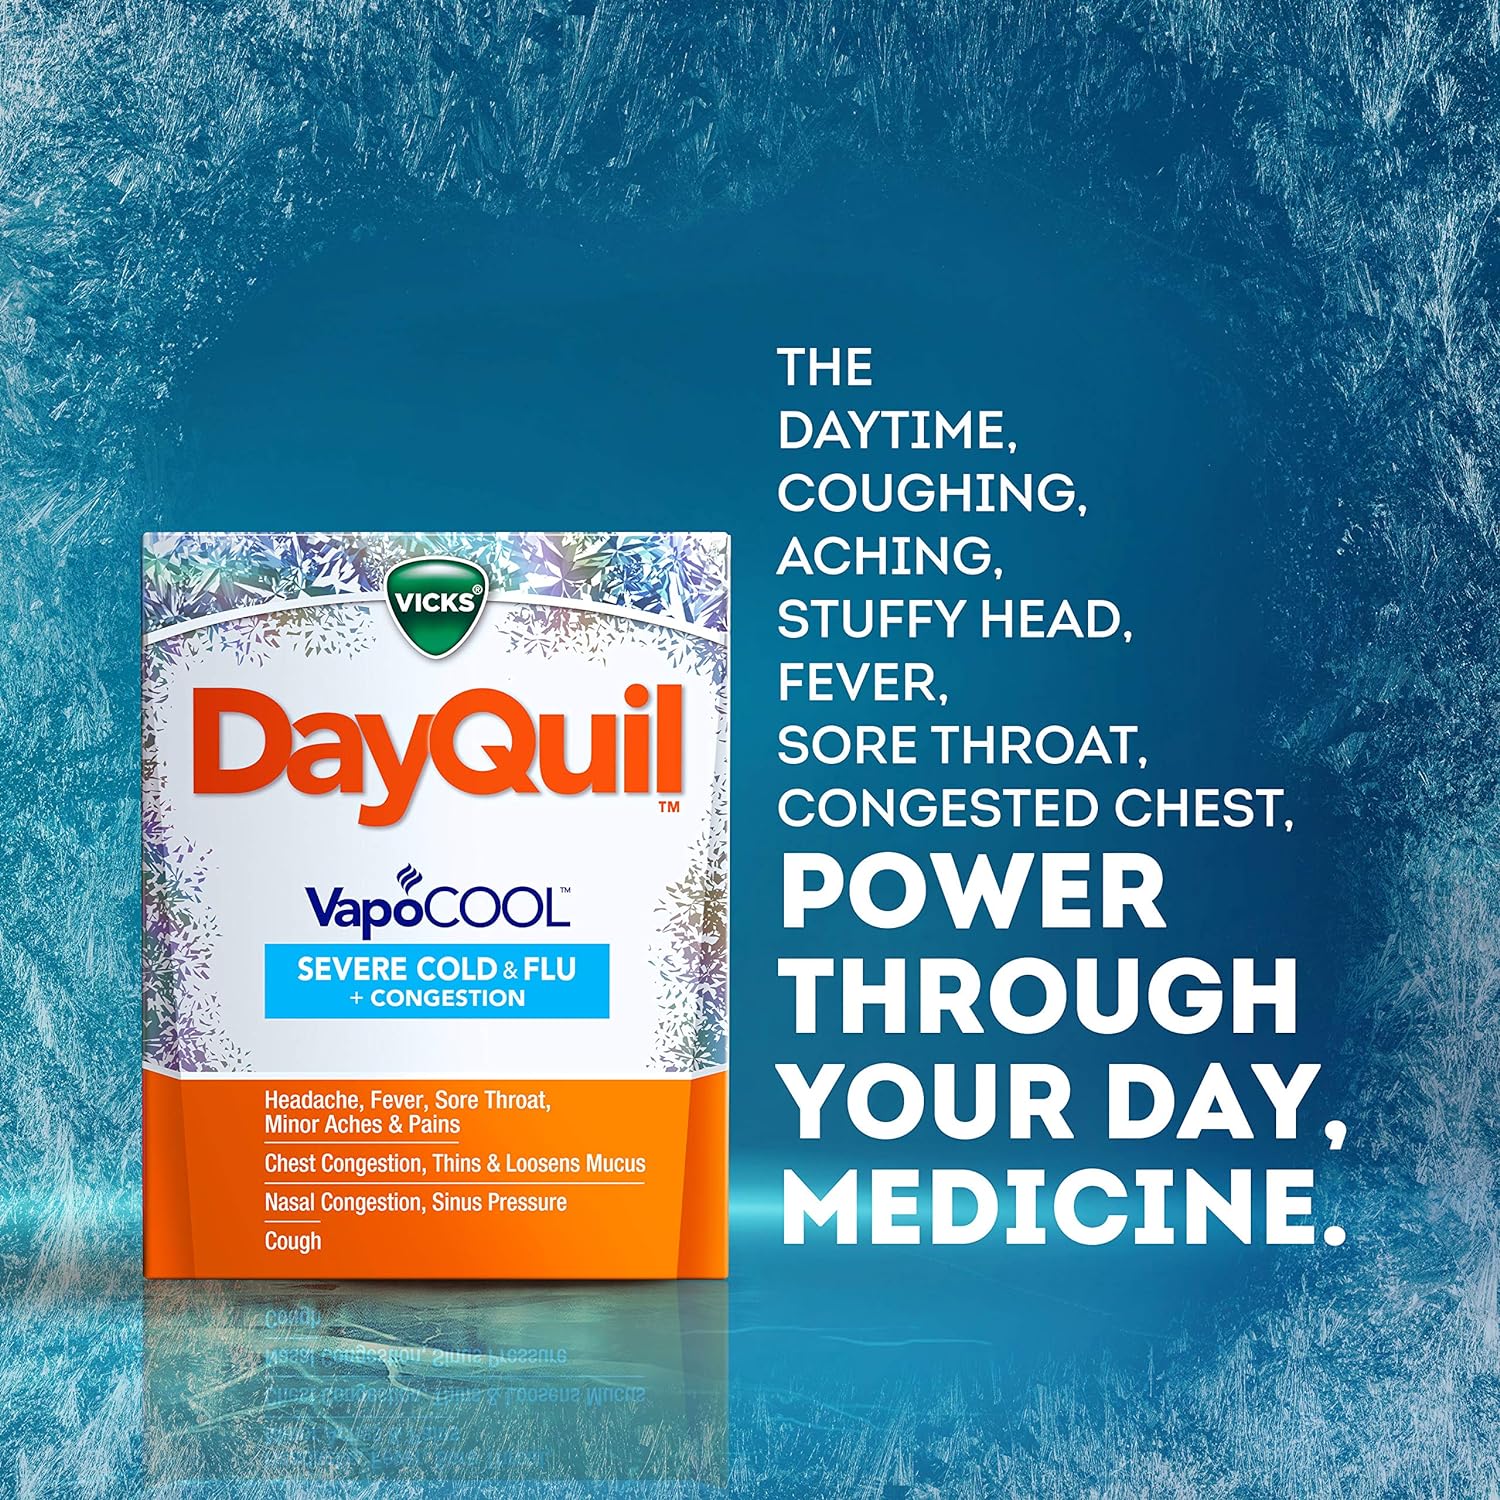 Vicks DayQuil and NyQuil VapoCOOL SEVERE Combo Cold & Flu + Congestion Medicine, Max Strength Relief For Fever, Sore Throat, Nasal Congestion, Sinus Pressure, Cough, 48 Count - 32 DayQuil, 16 NyQuil : Health & Household